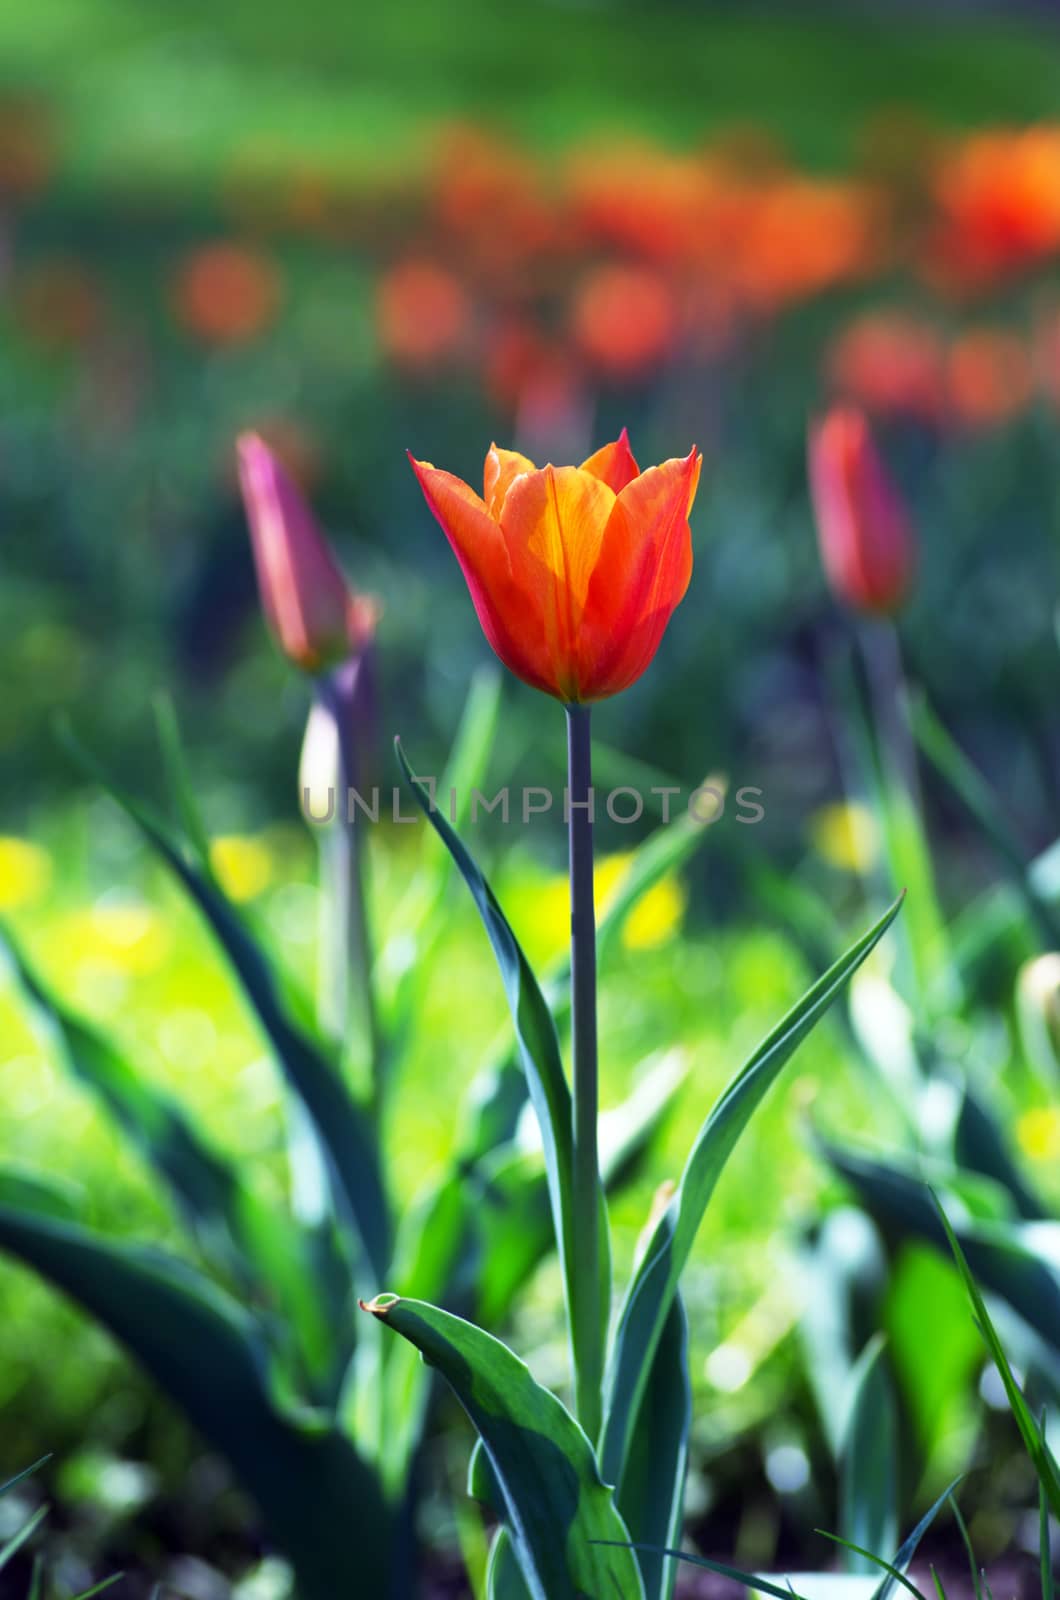  Spring background with tulips over natural background